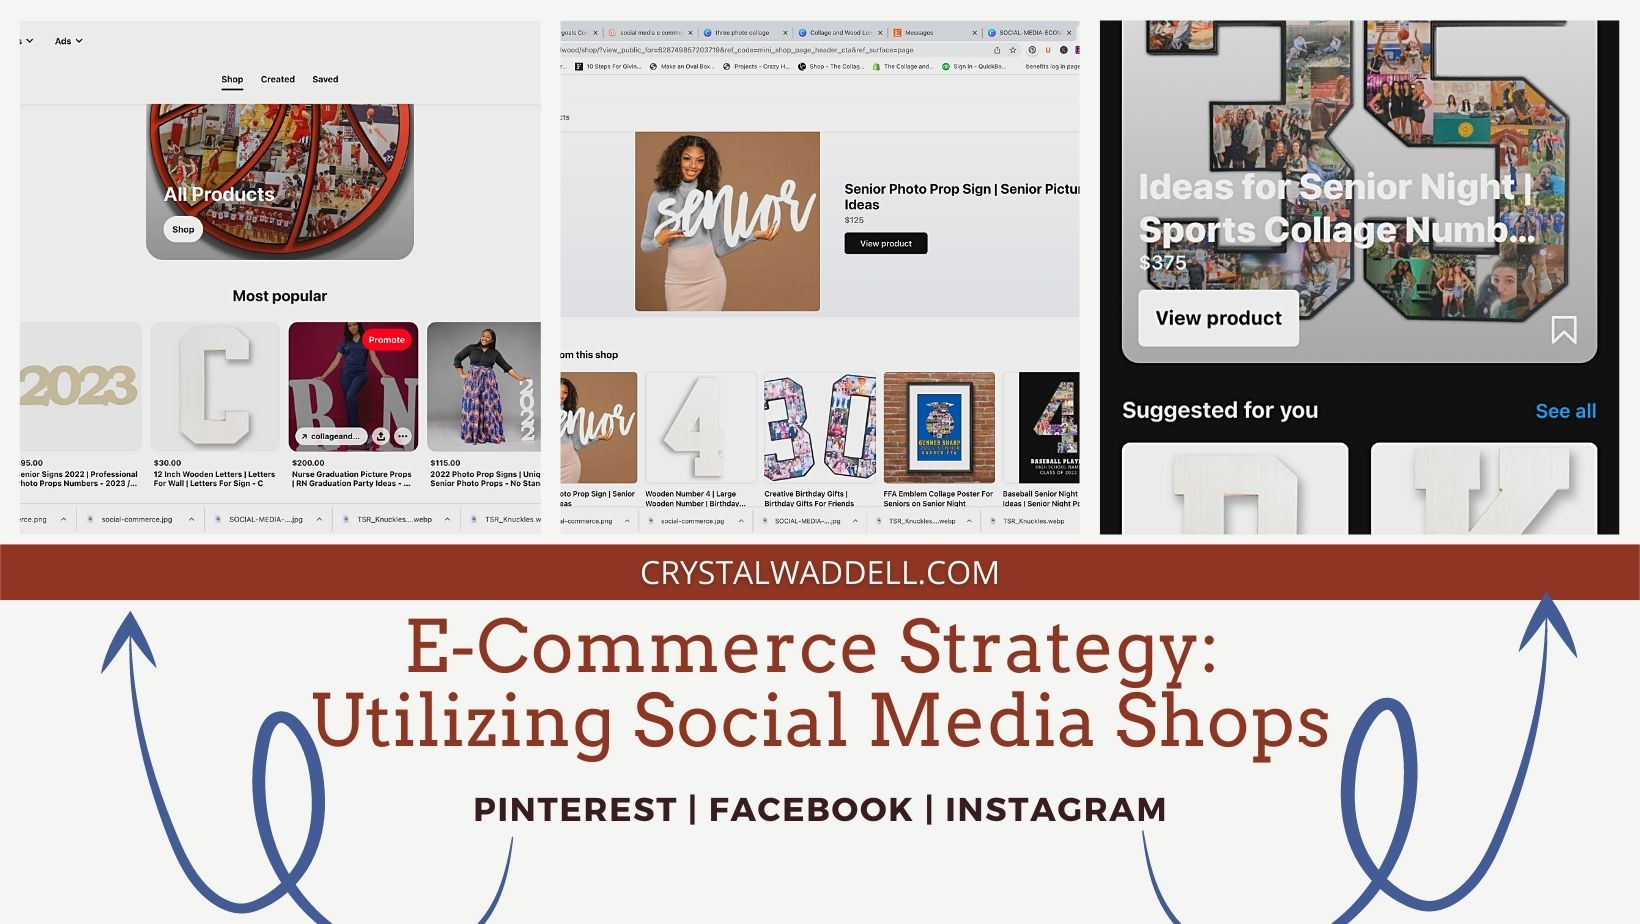 Successful Ecommerce social media strategies can include Facebook Shops and Instagram Shops.